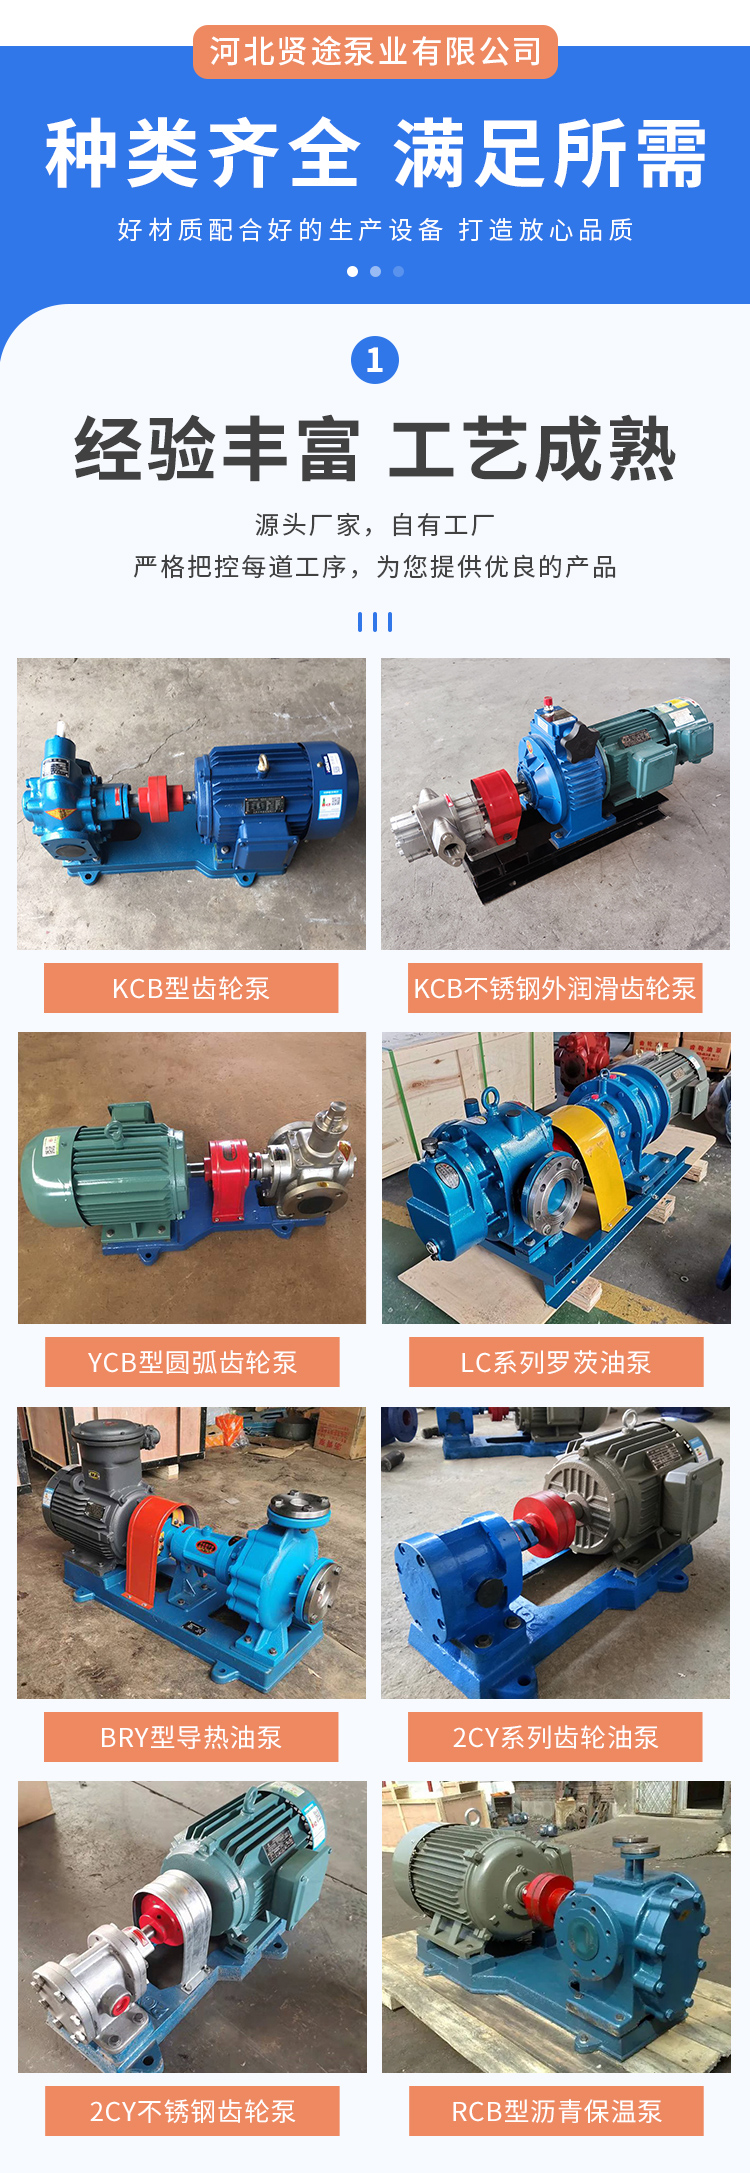 BRY type air-cooled centrifugal heat transfer oil pump heat transfer oil boiler circulation pump customized according to needs